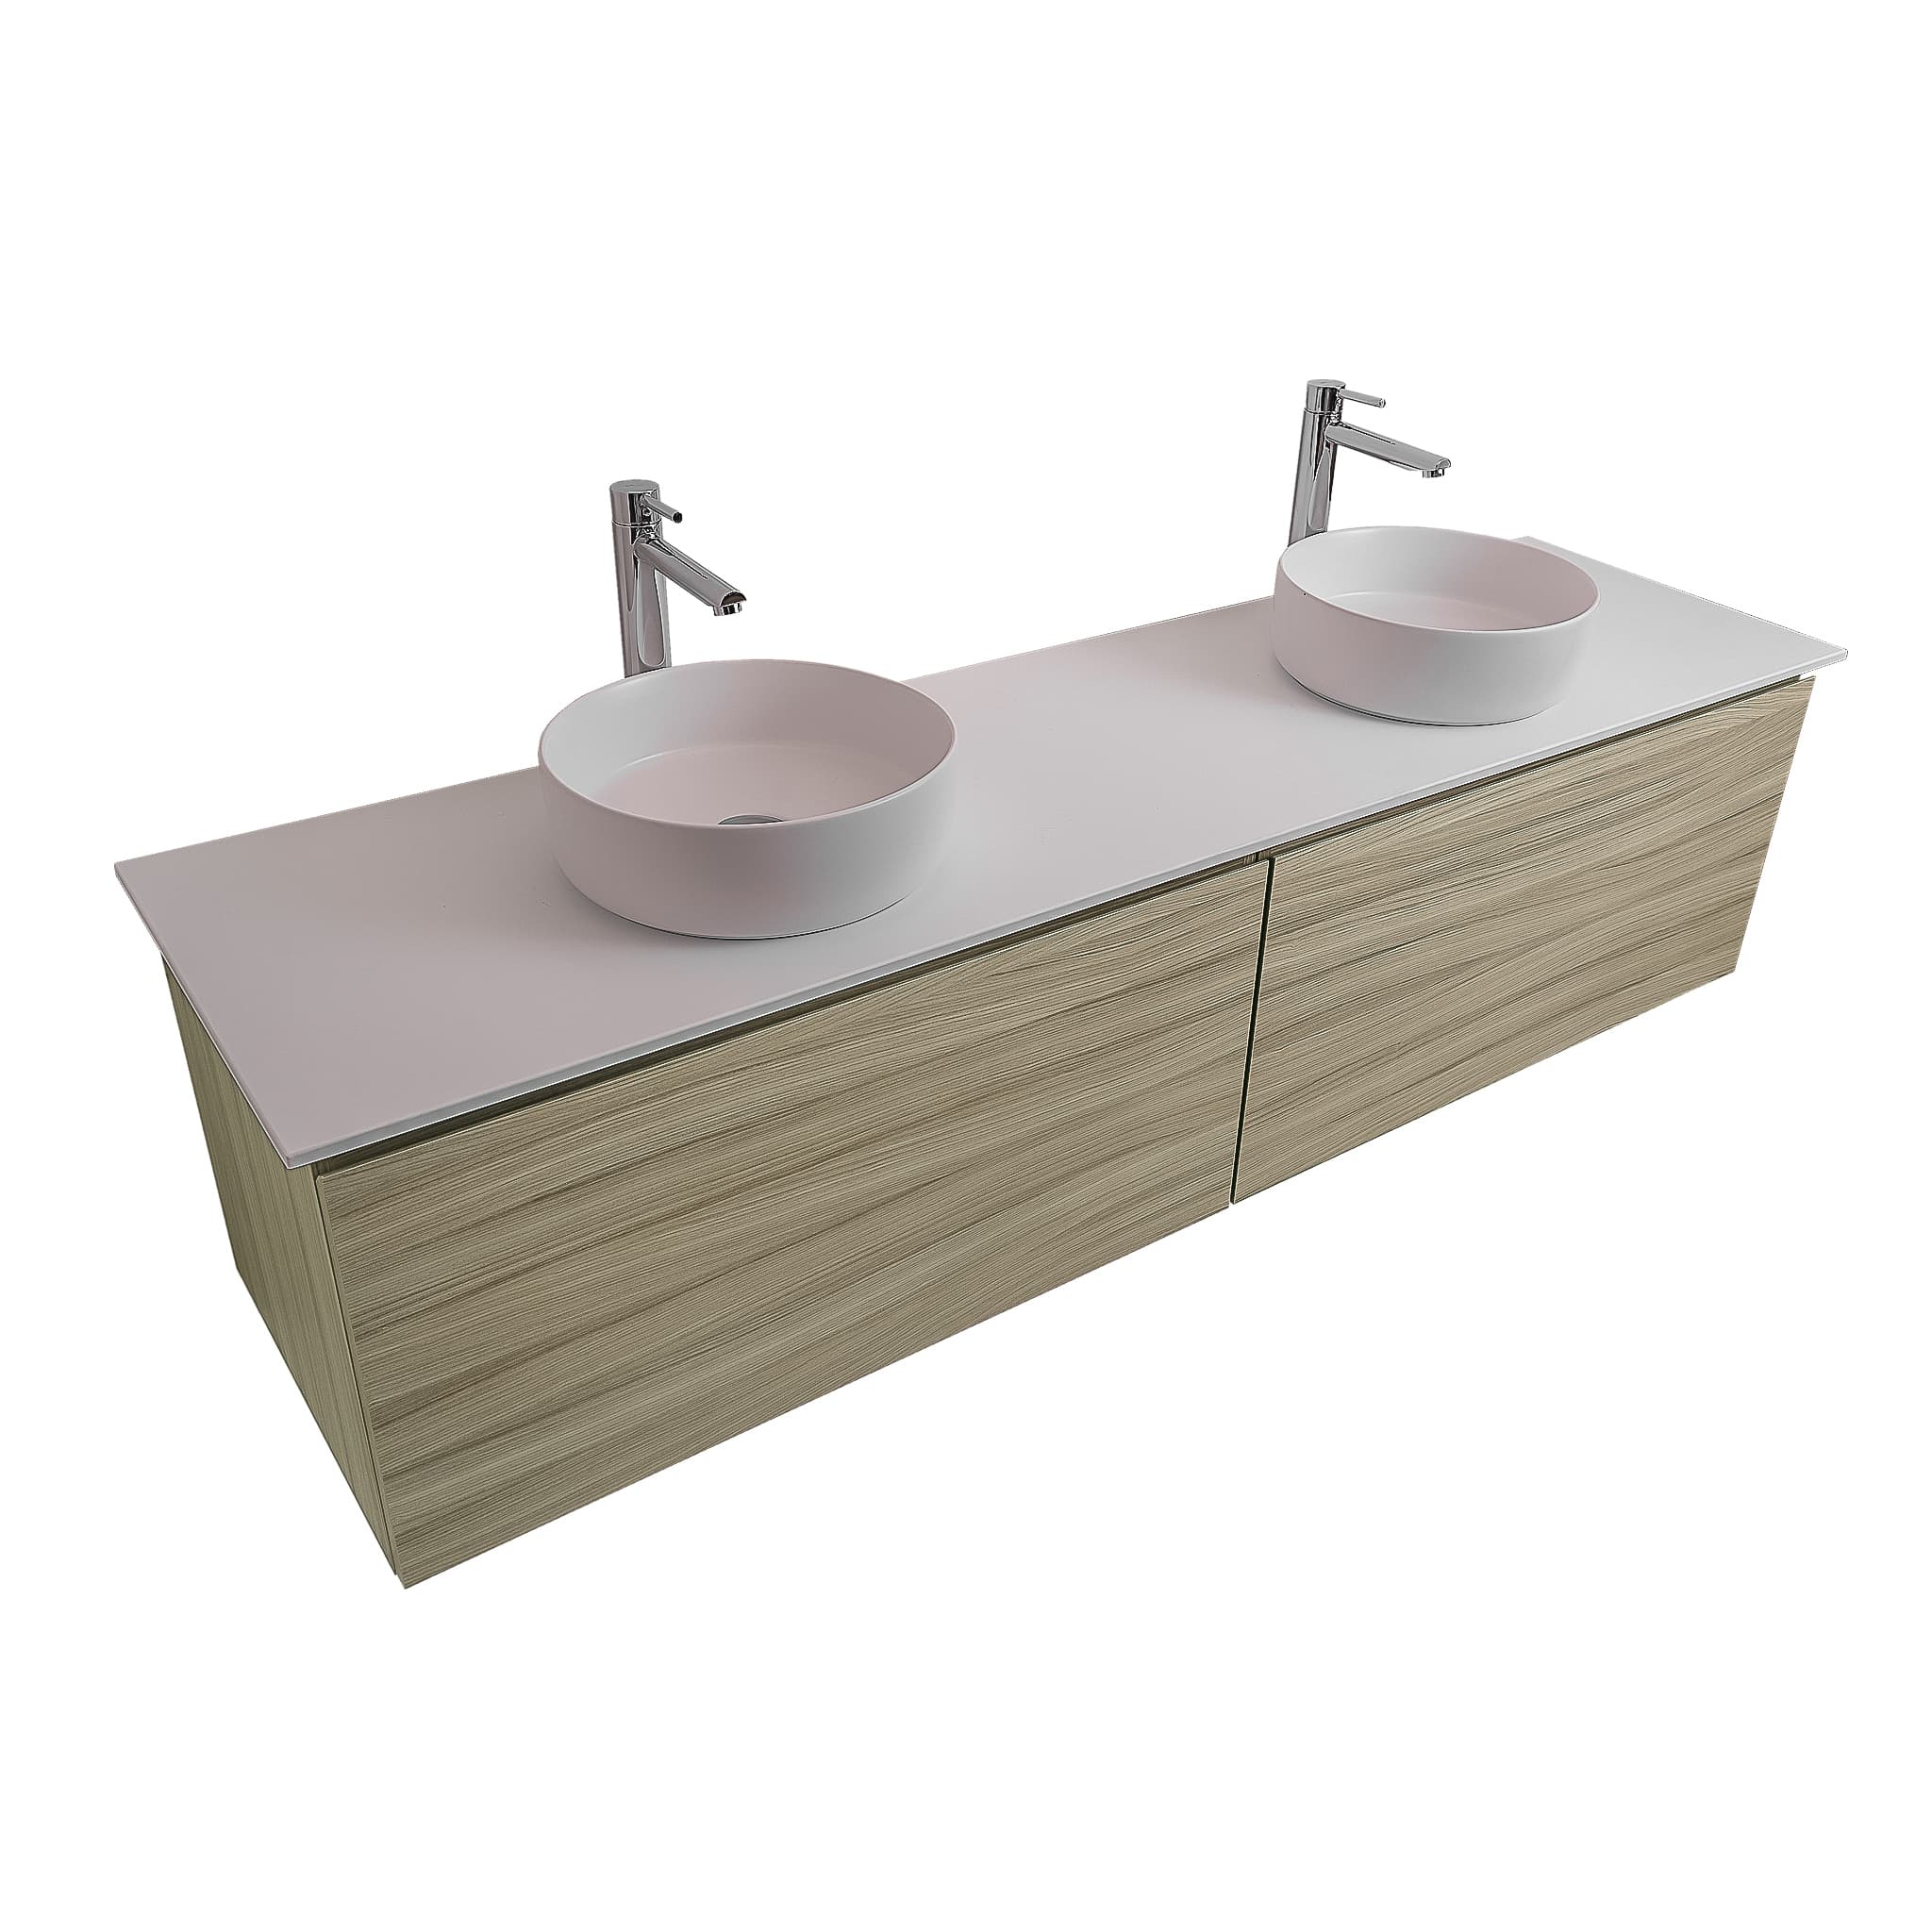 Venice 72 Nilo Grey Wood Texture Cabinet, Ares White Top And Two Ares White Ceramic Basin, Wall Mounted Modern Vanity Set